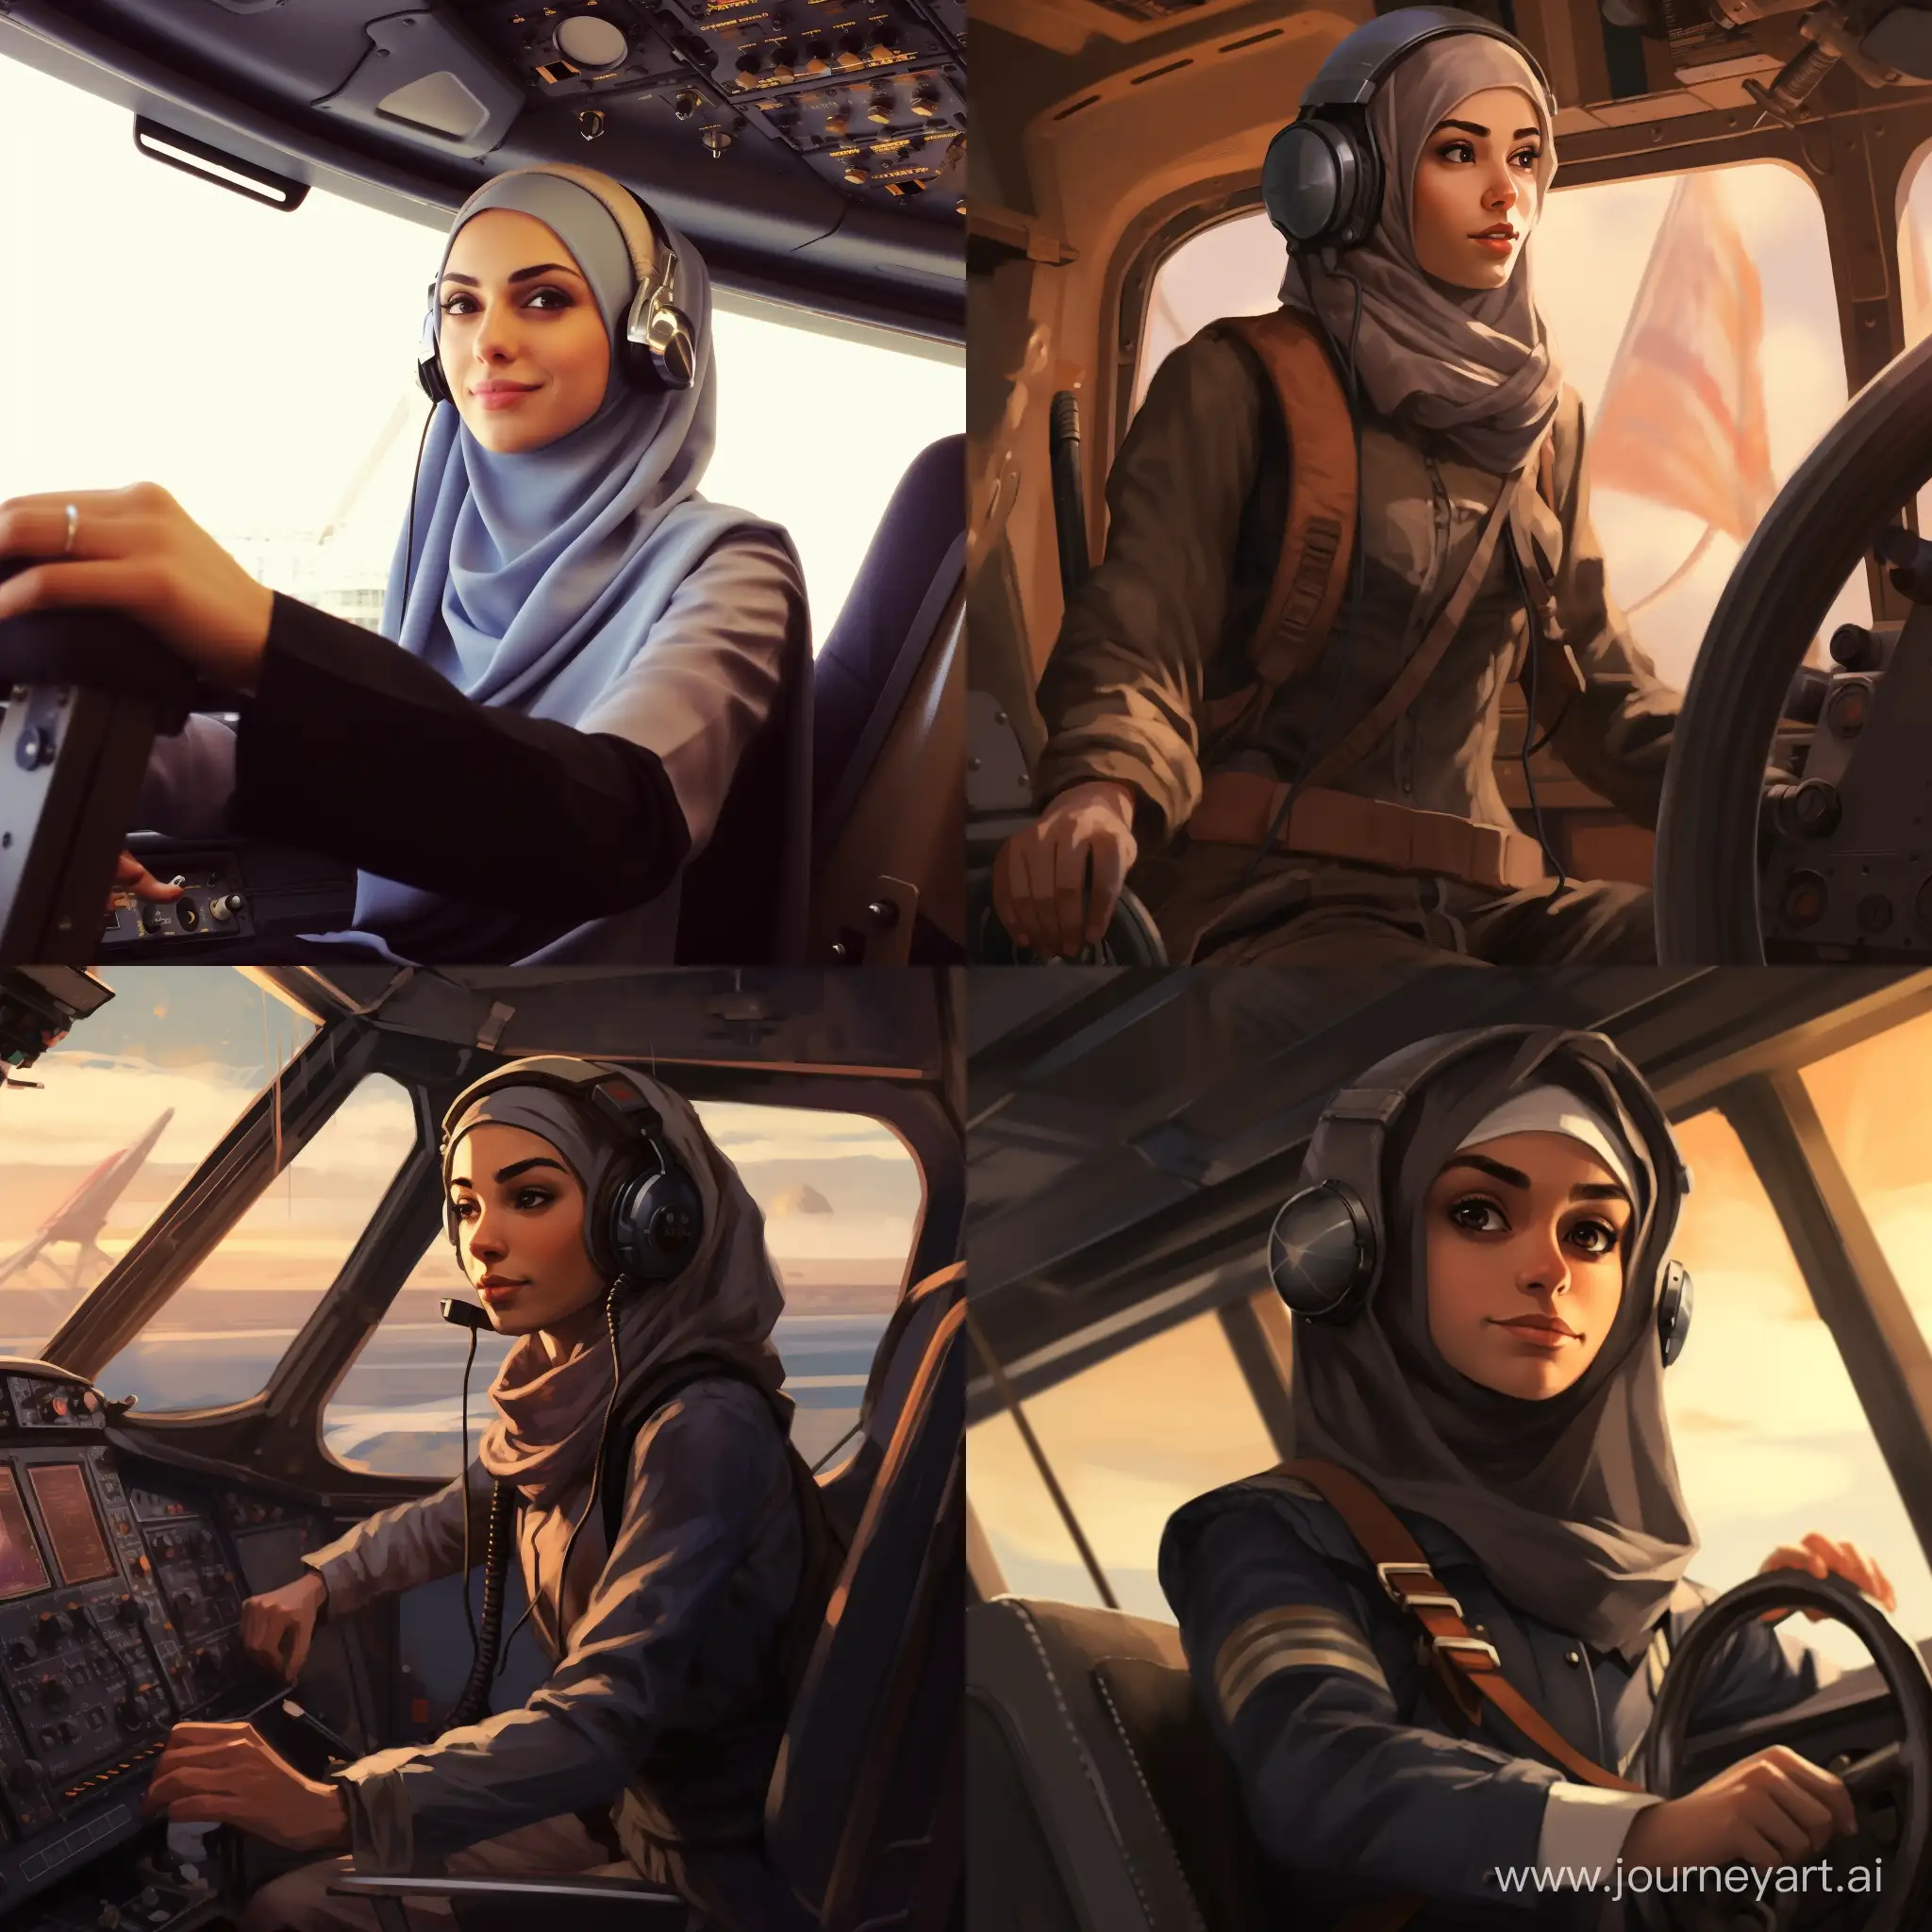 Muslim-Girl-Pilot-in-Domed-Airplane-Cultural-Harmony-and-Aviation-Adventure